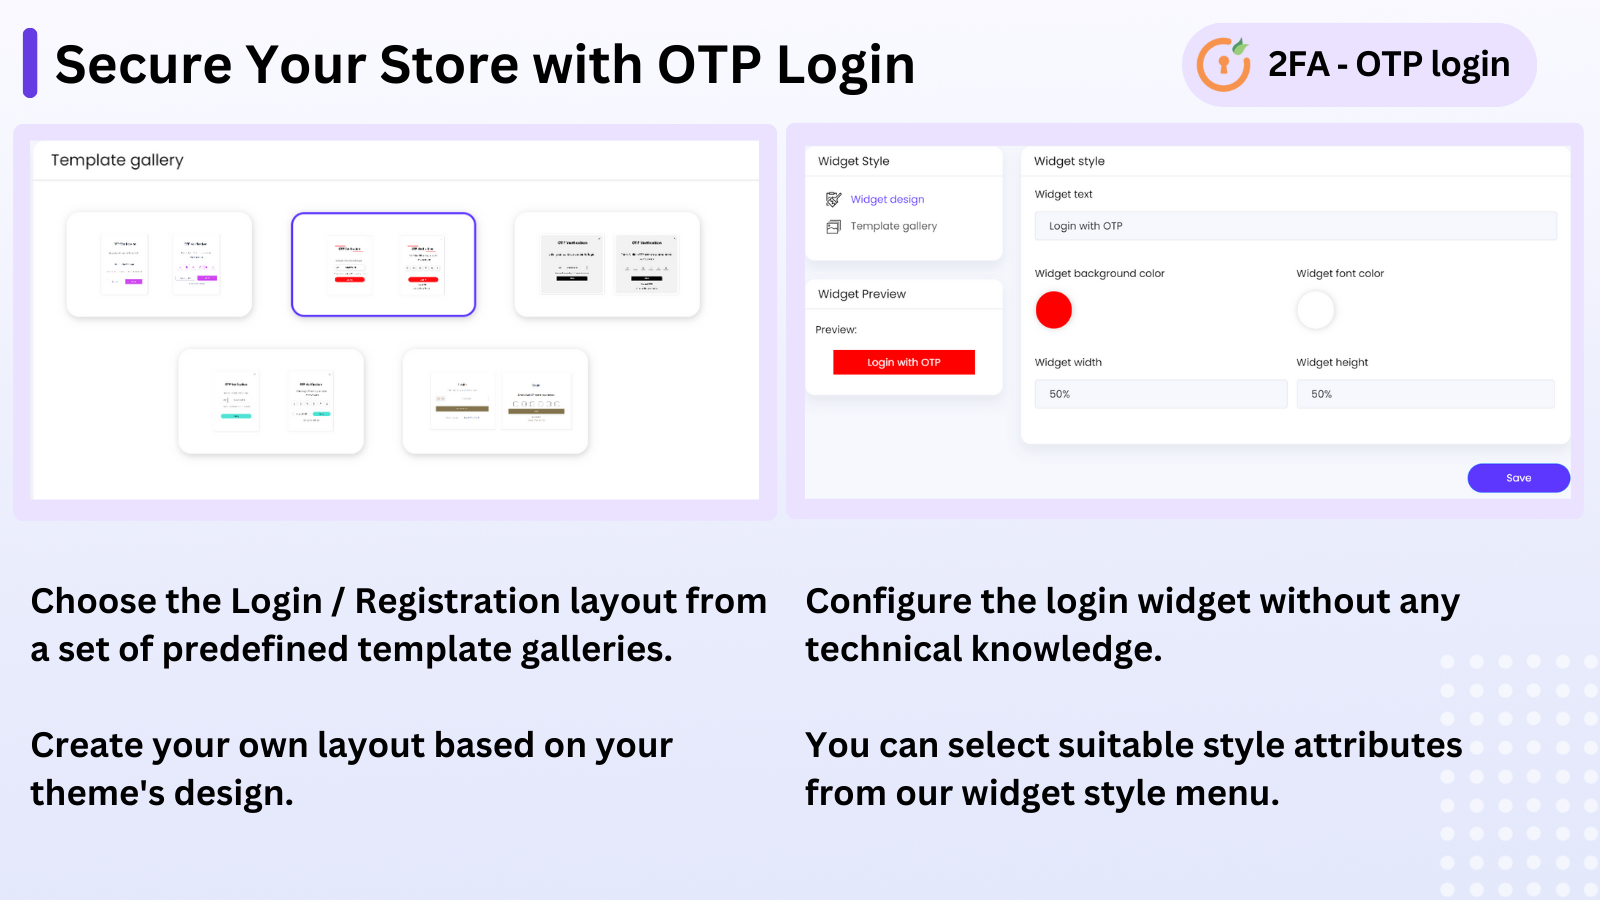 Login With OTP - Use predefined templates for OTP Login